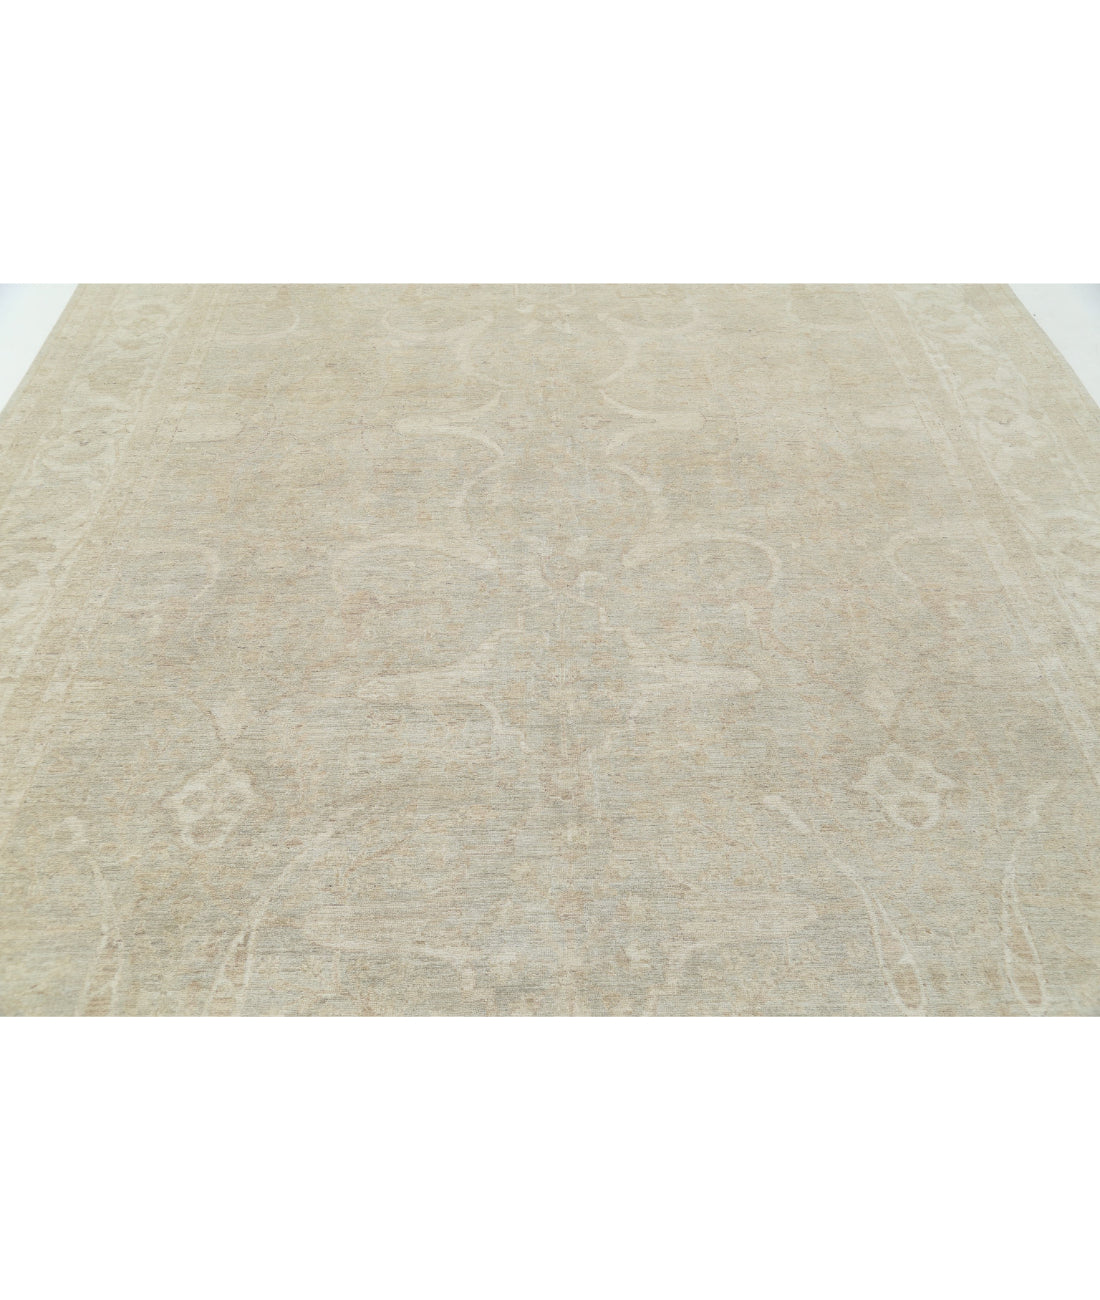 Hand Knotted Serenity Wool Rug - 8'11'' x 11'2'' 8'11'' x 11'2'' (268 X 335) / Grey / Ivory